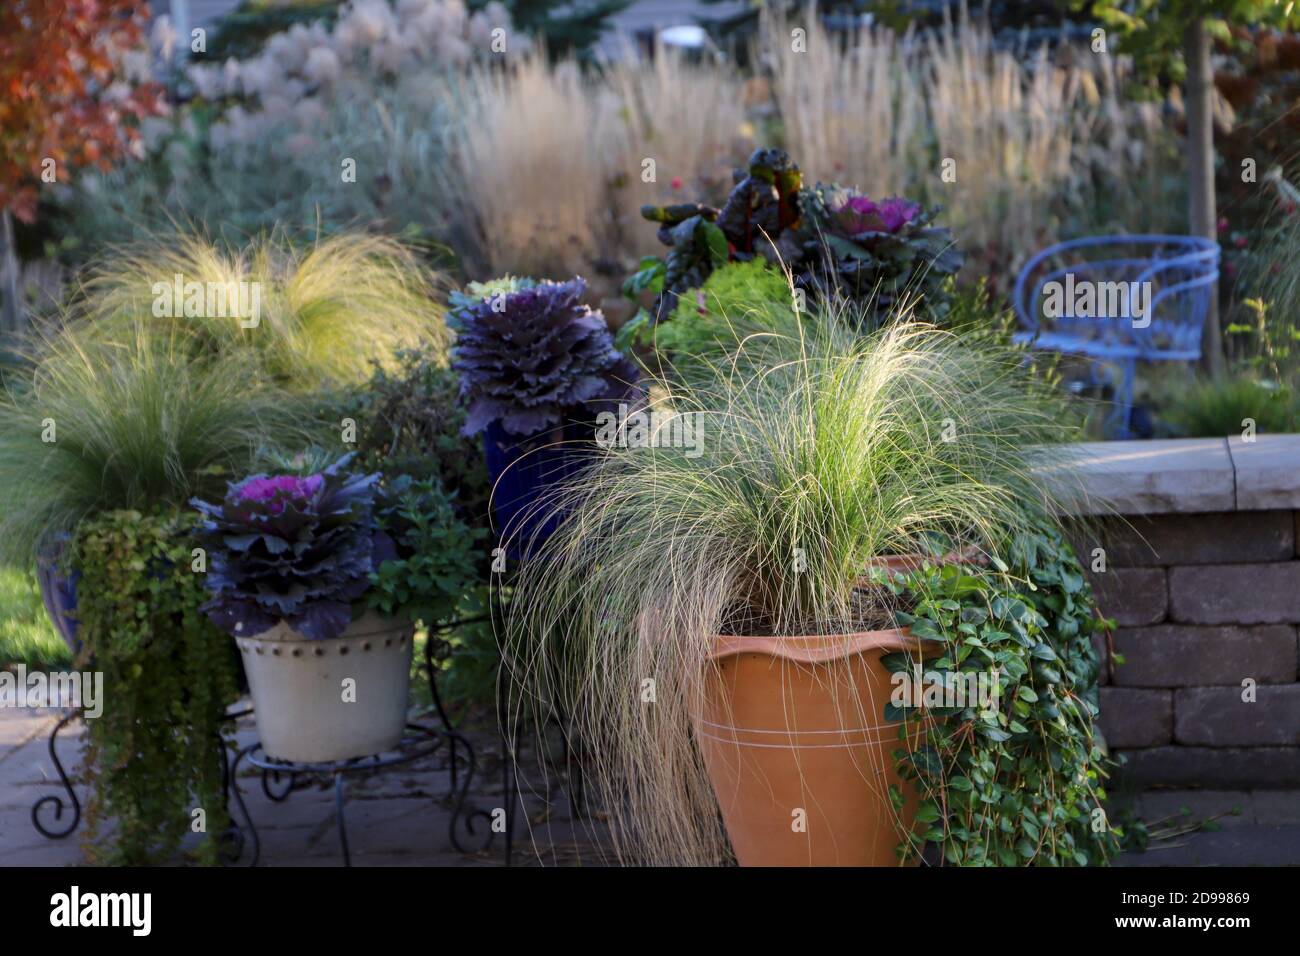 A charming collection of fall garden containers with purple and green kale and hakone grass. Description9 Stock Photo